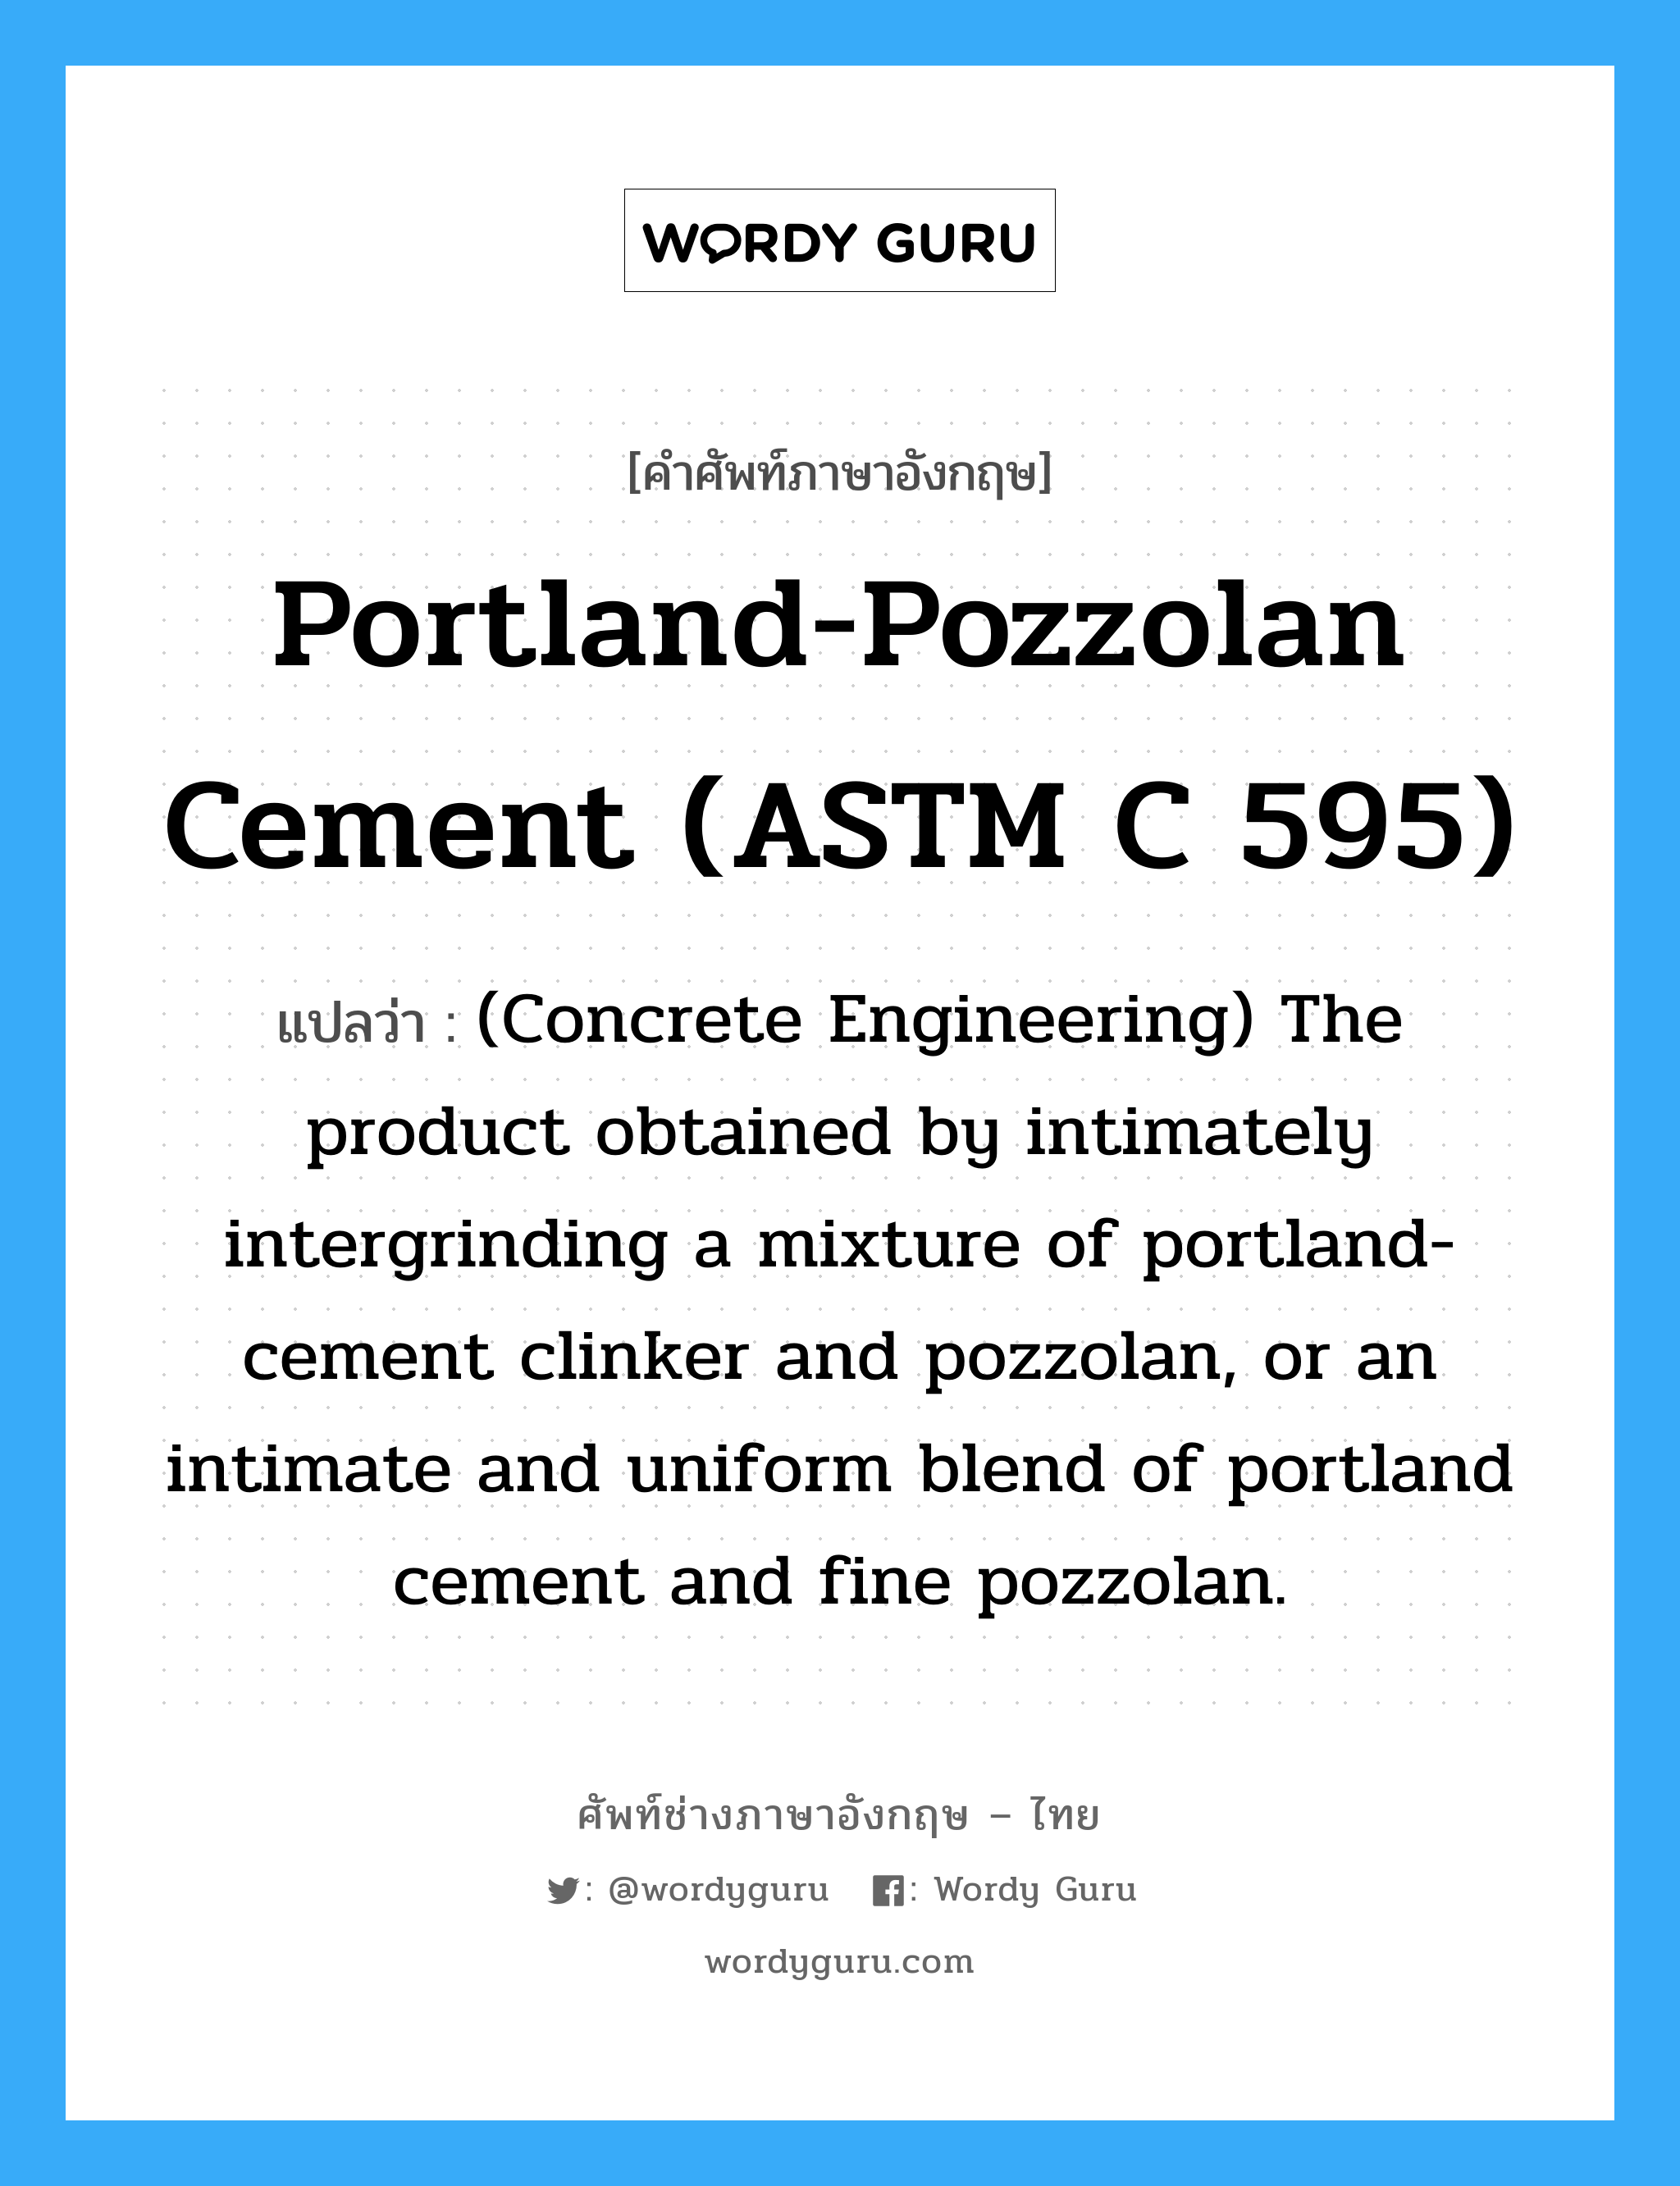 (Concrete Engineering) The product obtained by pulverizing clinker consisting essentially of hydraulic calcium silicates. ภาษาอังกฤษ?, คำศัพท์ช่างภาษาอังกฤษ - ไทย (Concrete Engineering) The product obtained by intimately intergrinding a mixture of portland-cement clinker and pozzolan, or an intimate and uniform blend of portland cement and fine pozzolan. คำศัพท์ภาษาอังกฤษ (Concrete Engineering) The product obtained by intimately intergrinding a mixture of portland-cement clinker and pozzolan, or an intimate and uniform blend of portland cement and fine pozzolan. แปลว่า Portland-Pozzolan Cement (ASTM C 595)